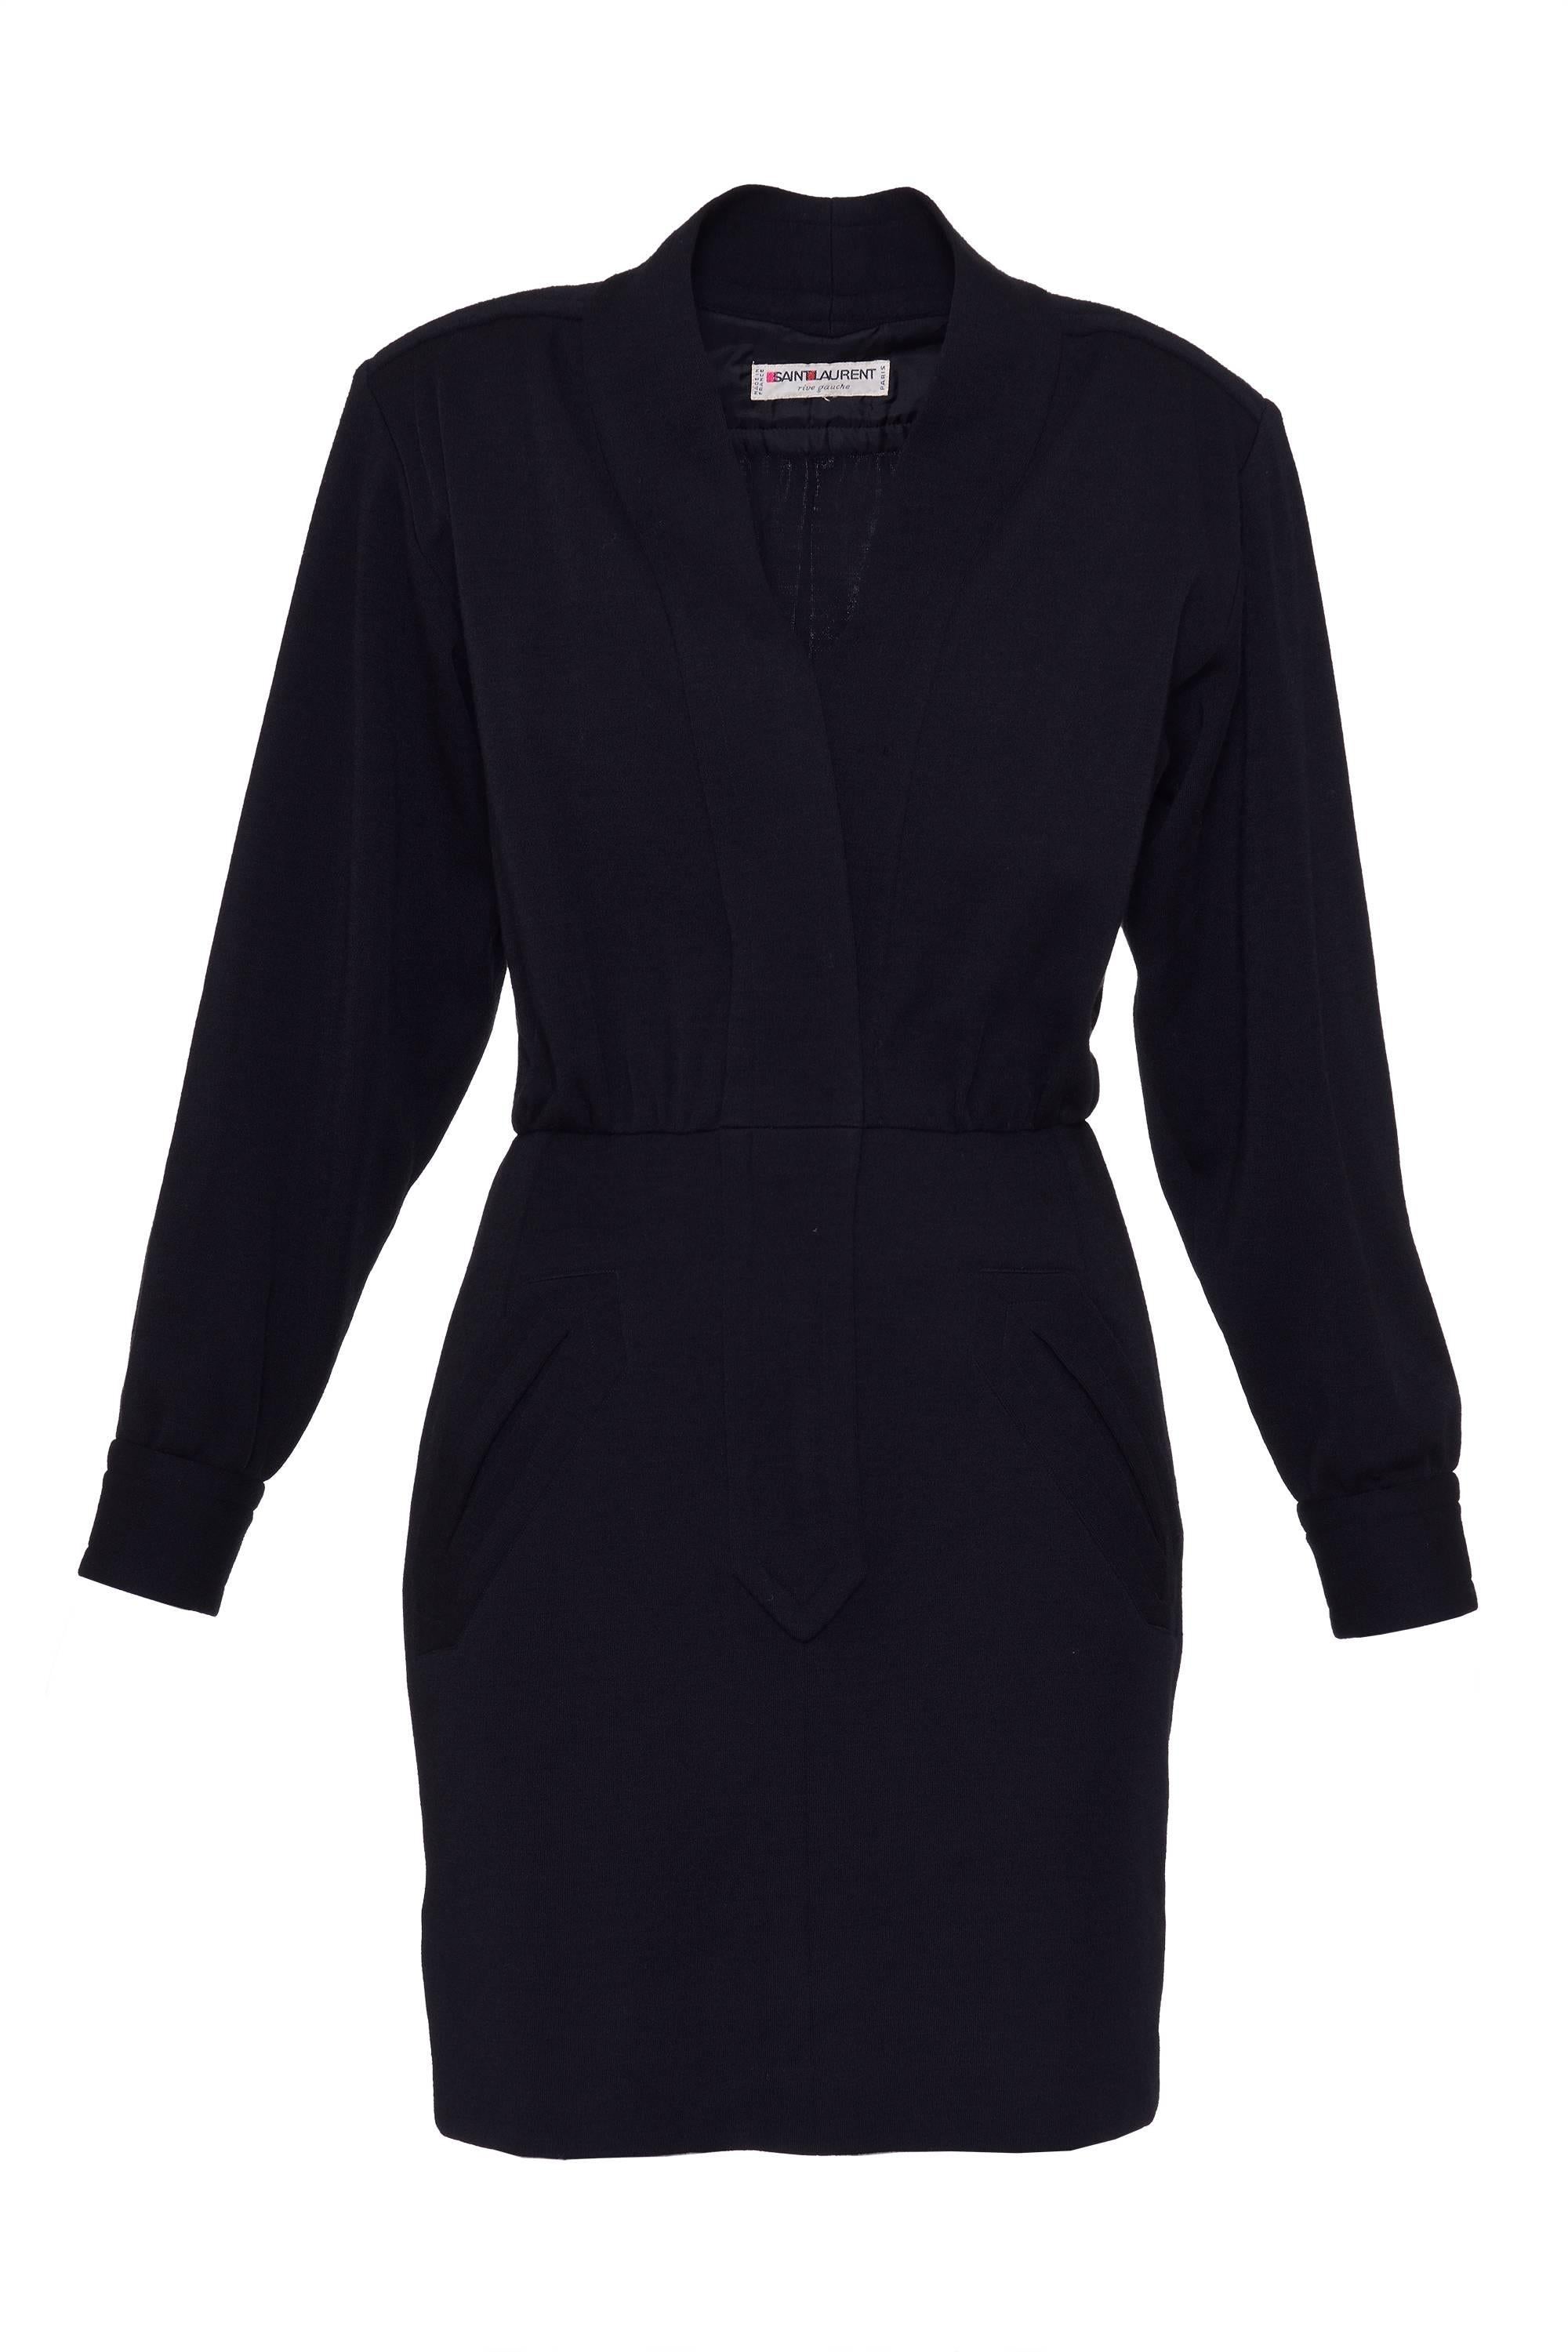 This lovely 1980s Rive Gauche black suit dress by YVES SAINT LAURENT has two front slashed jetted pockets, shoulder pads, V necklace, back horizontal yokes, long sleeves, buttoned cuffs, snap button, button, hook and bar closure on the top, and